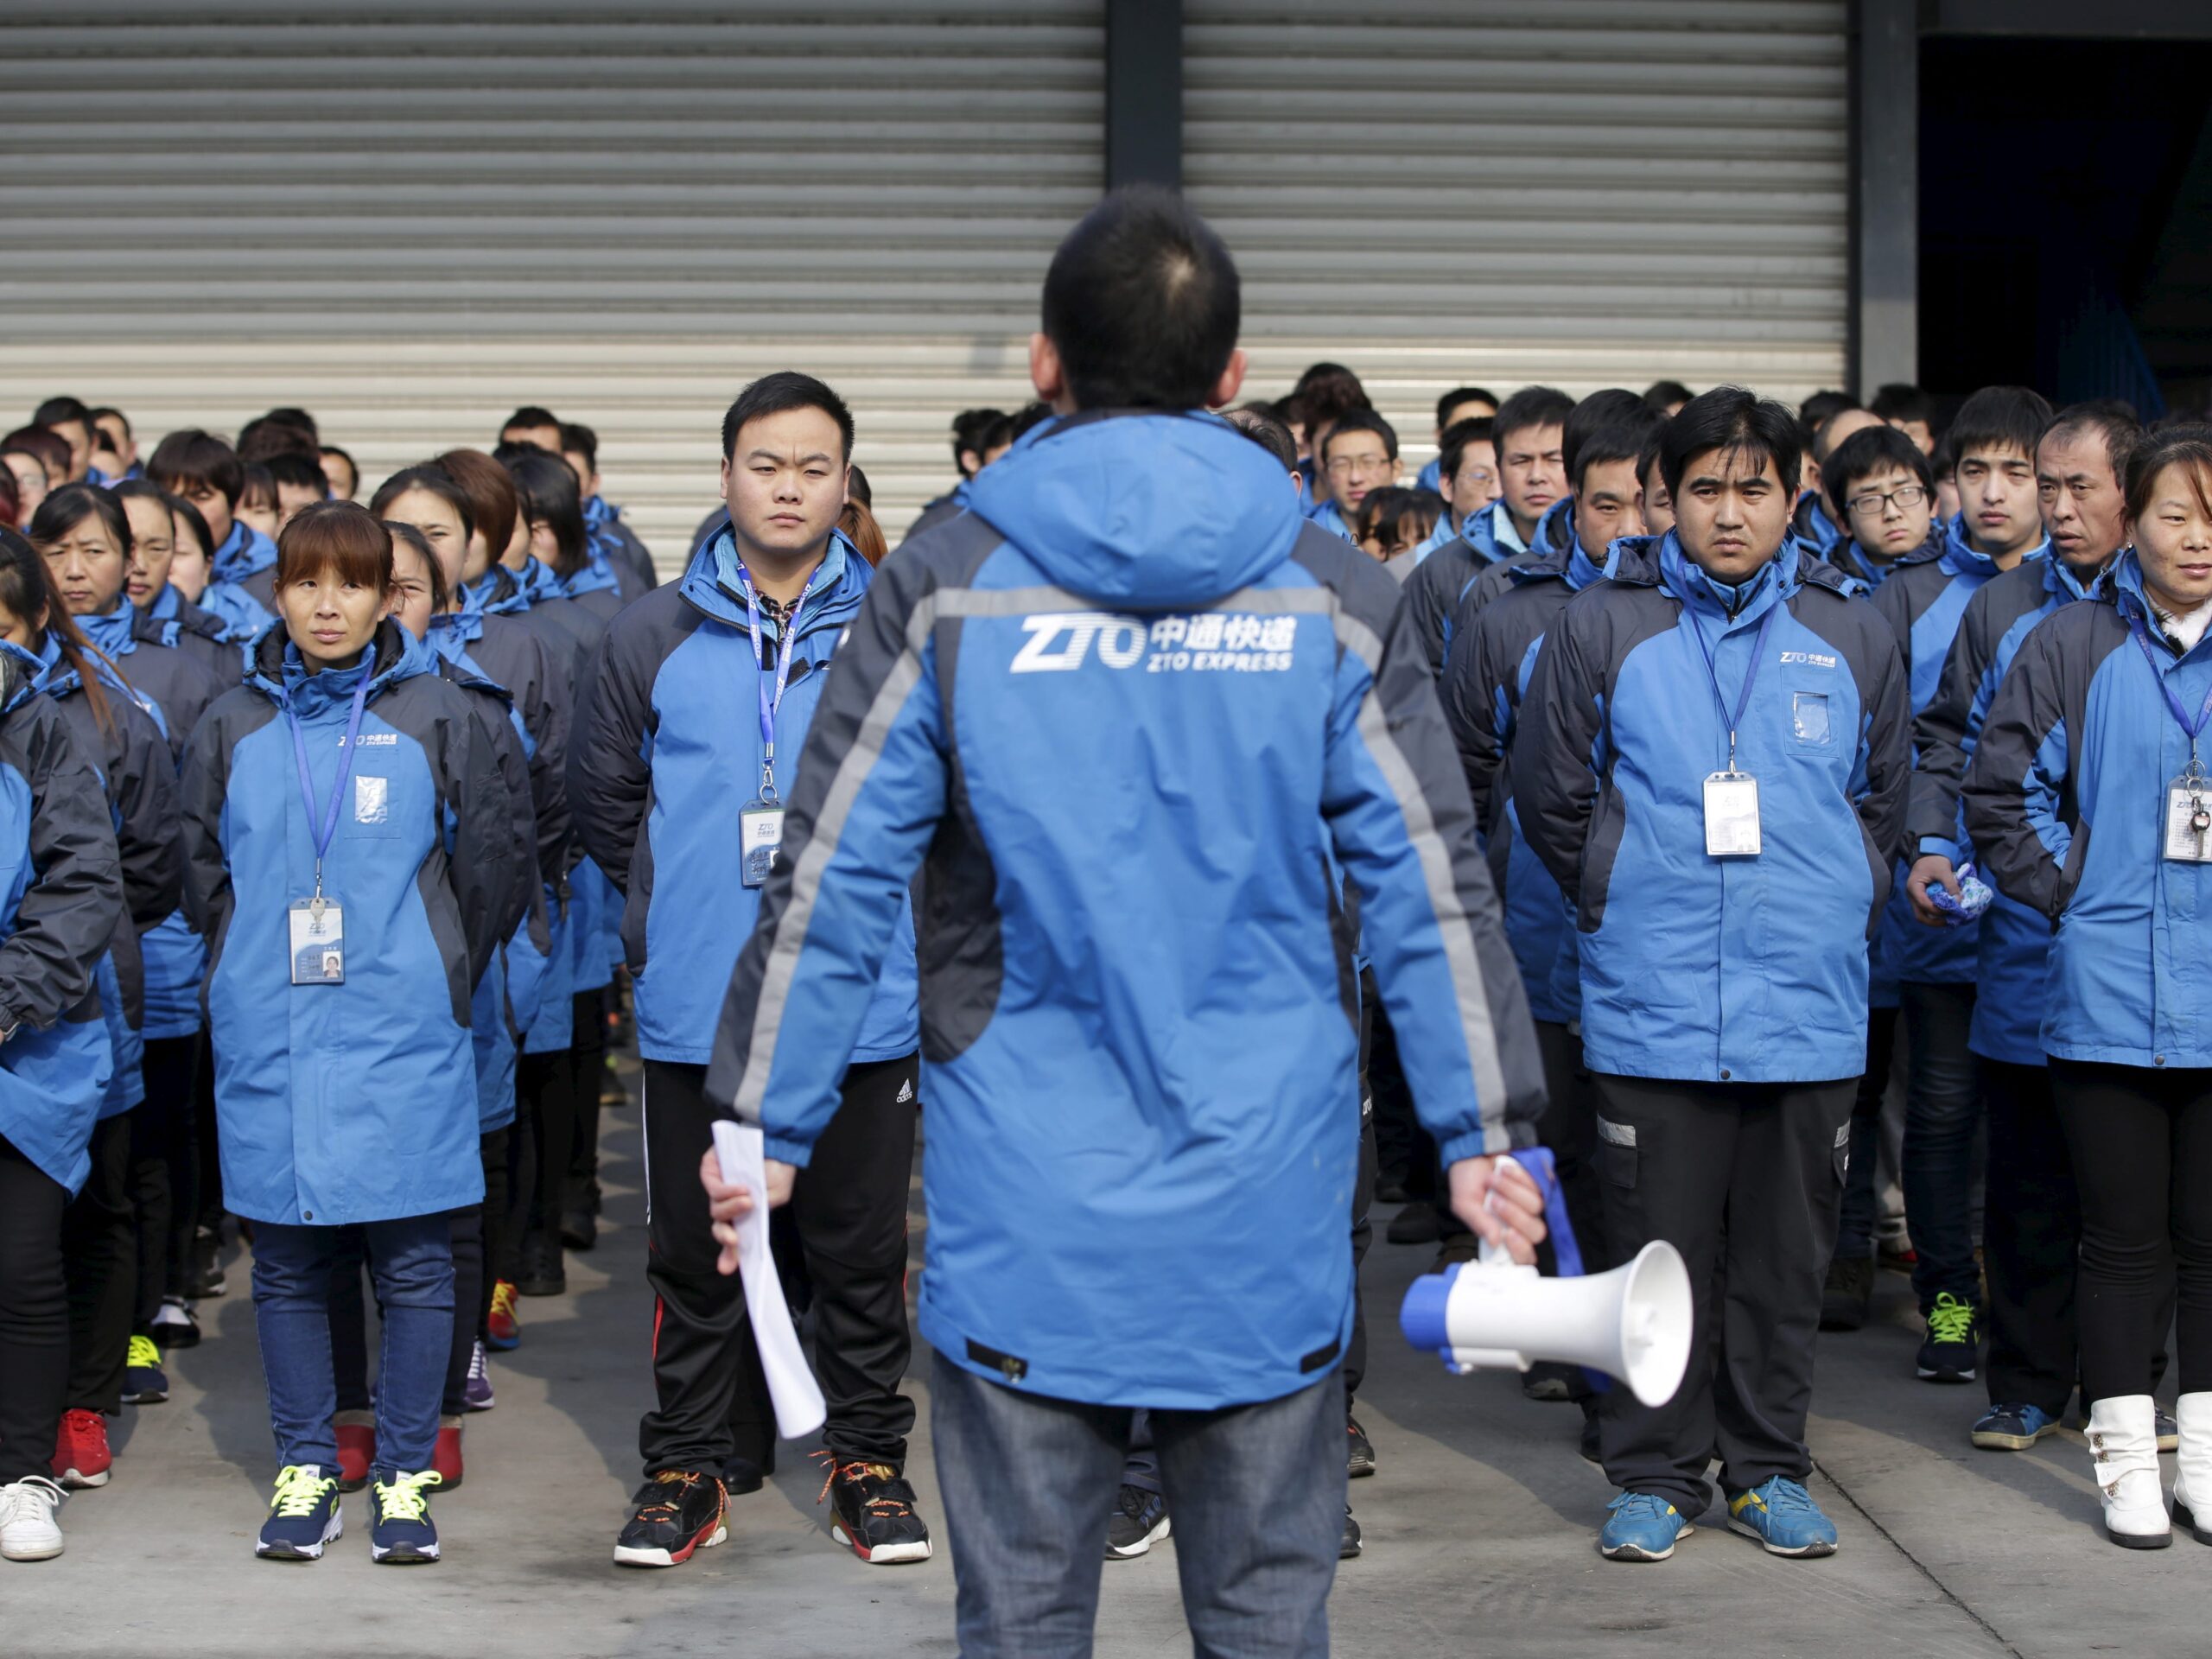 Chinese people stand in straight lines wearing blue jackets that say ZTO Express as one person addresses the group.